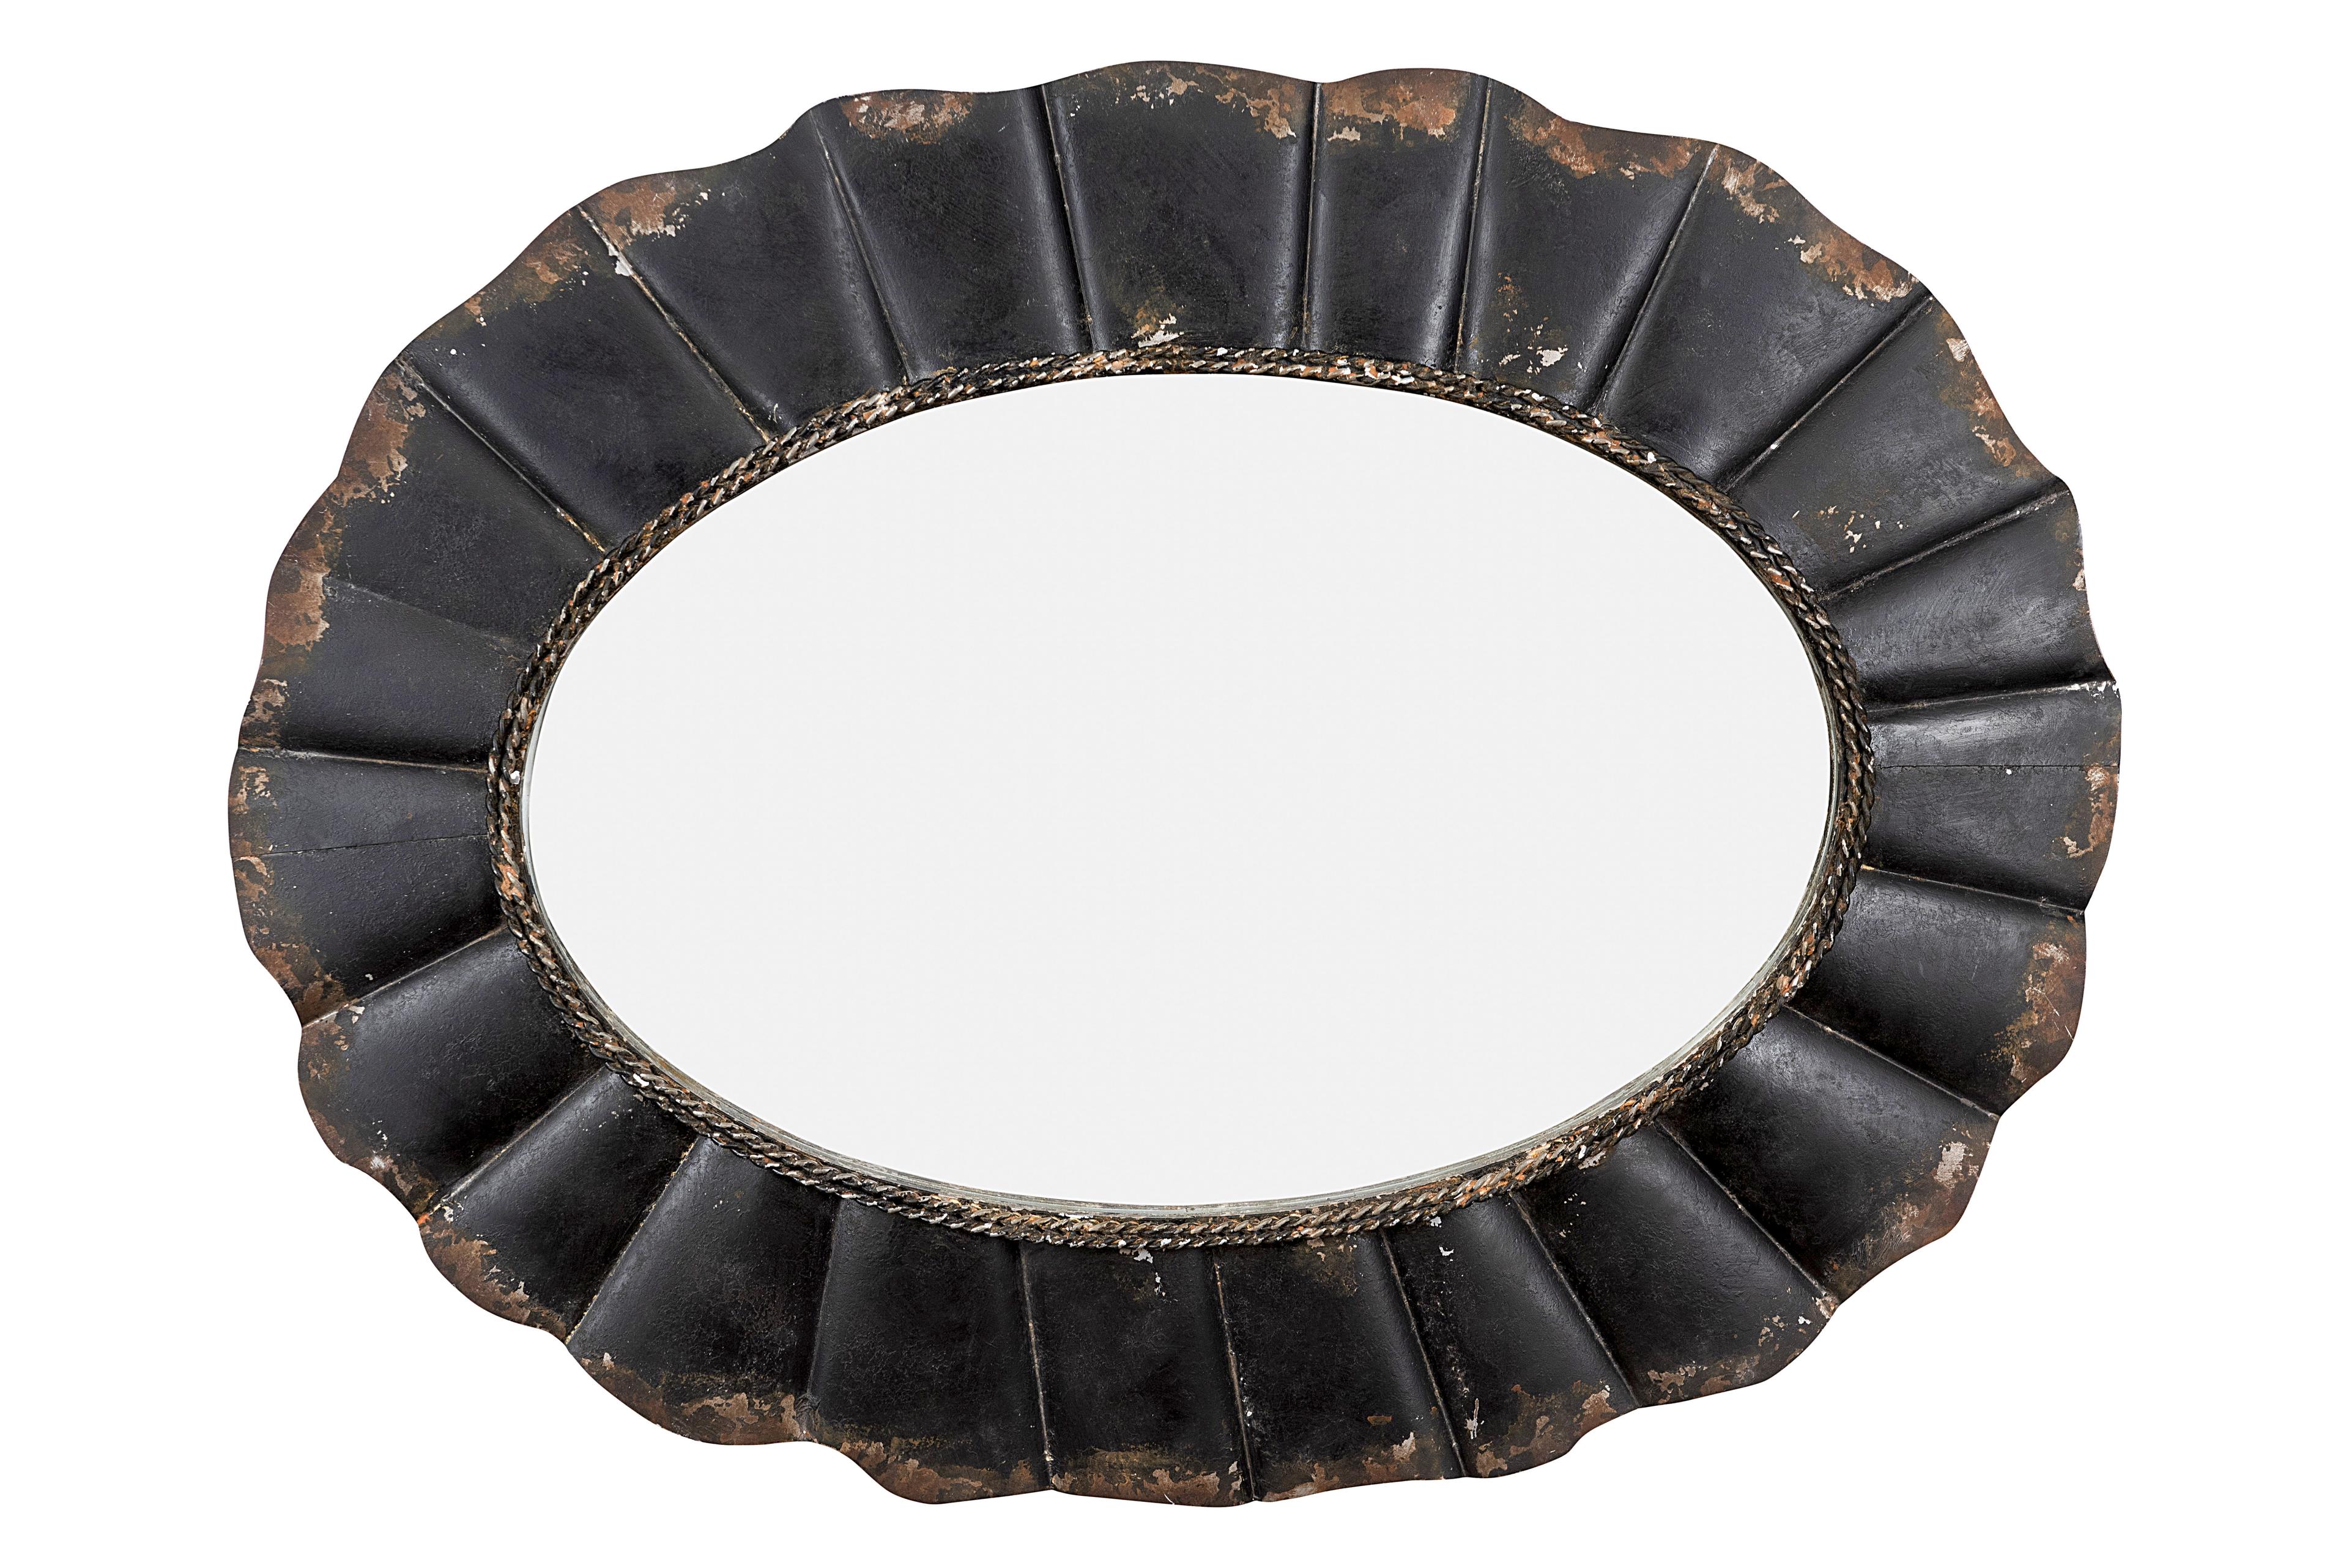 Elegant Full-Length Oval Wooden Mirror with Silver Accents, 24"x31"